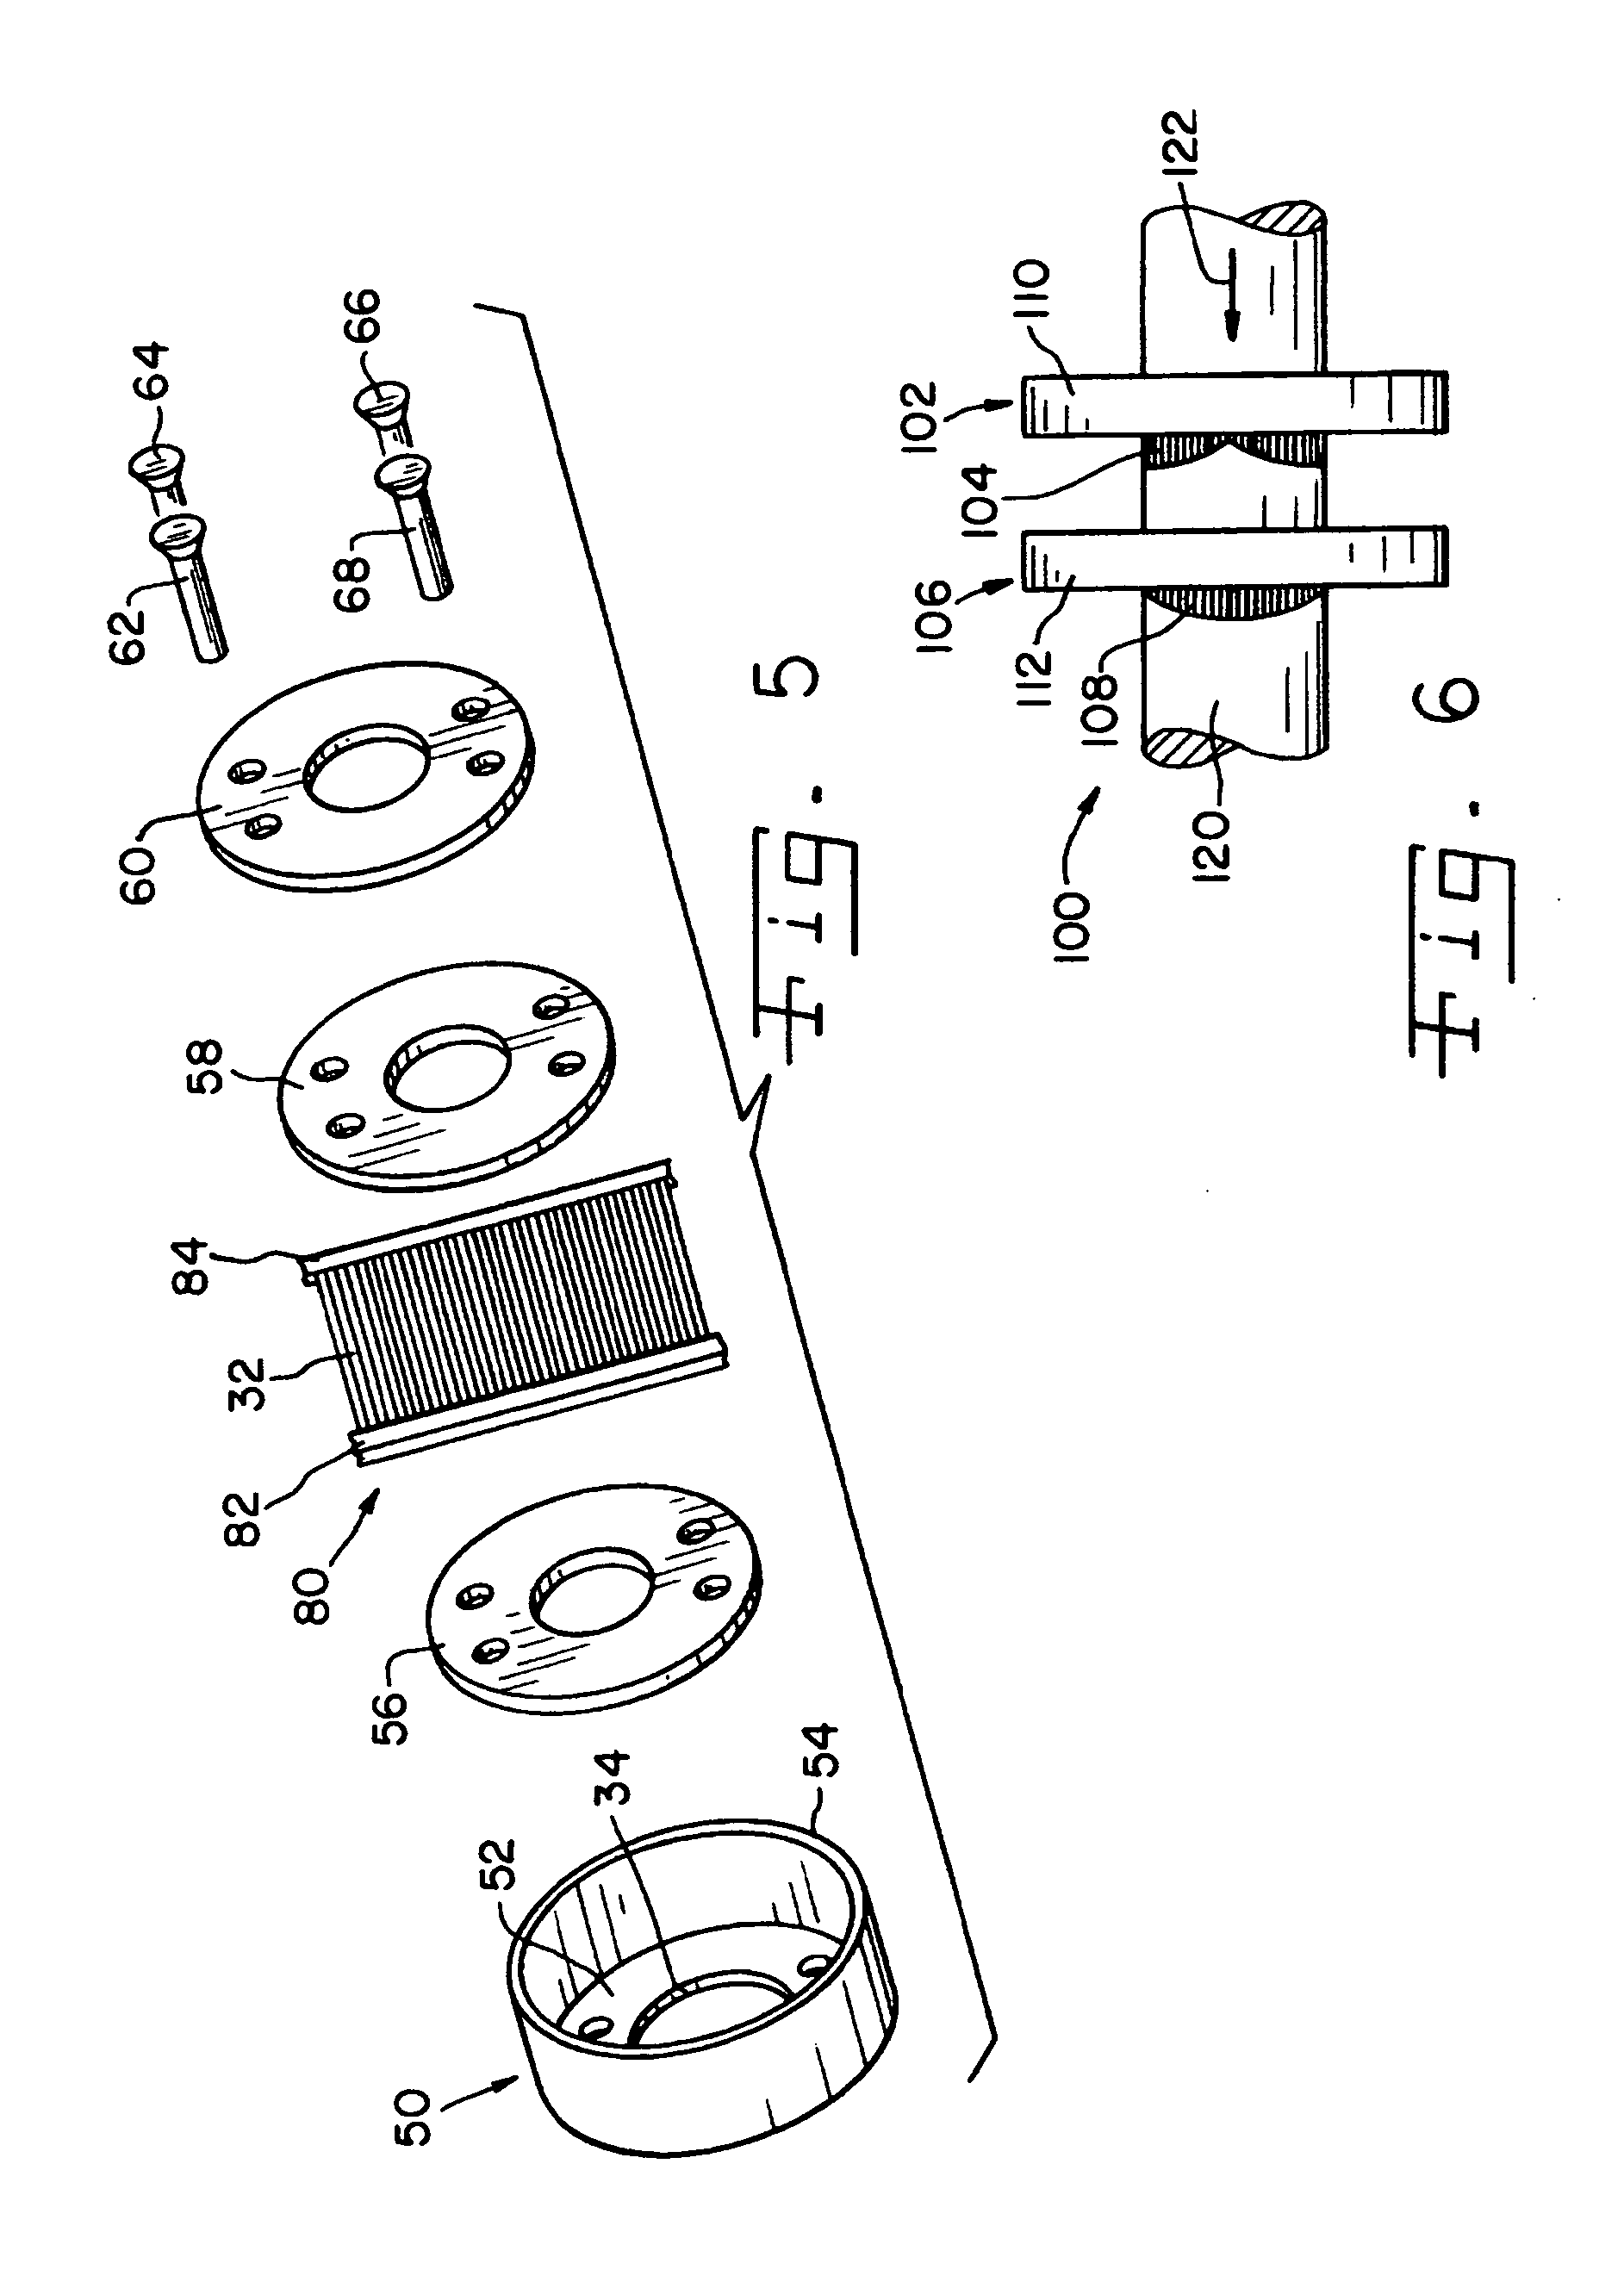 Contact ring having electrically conductive brush